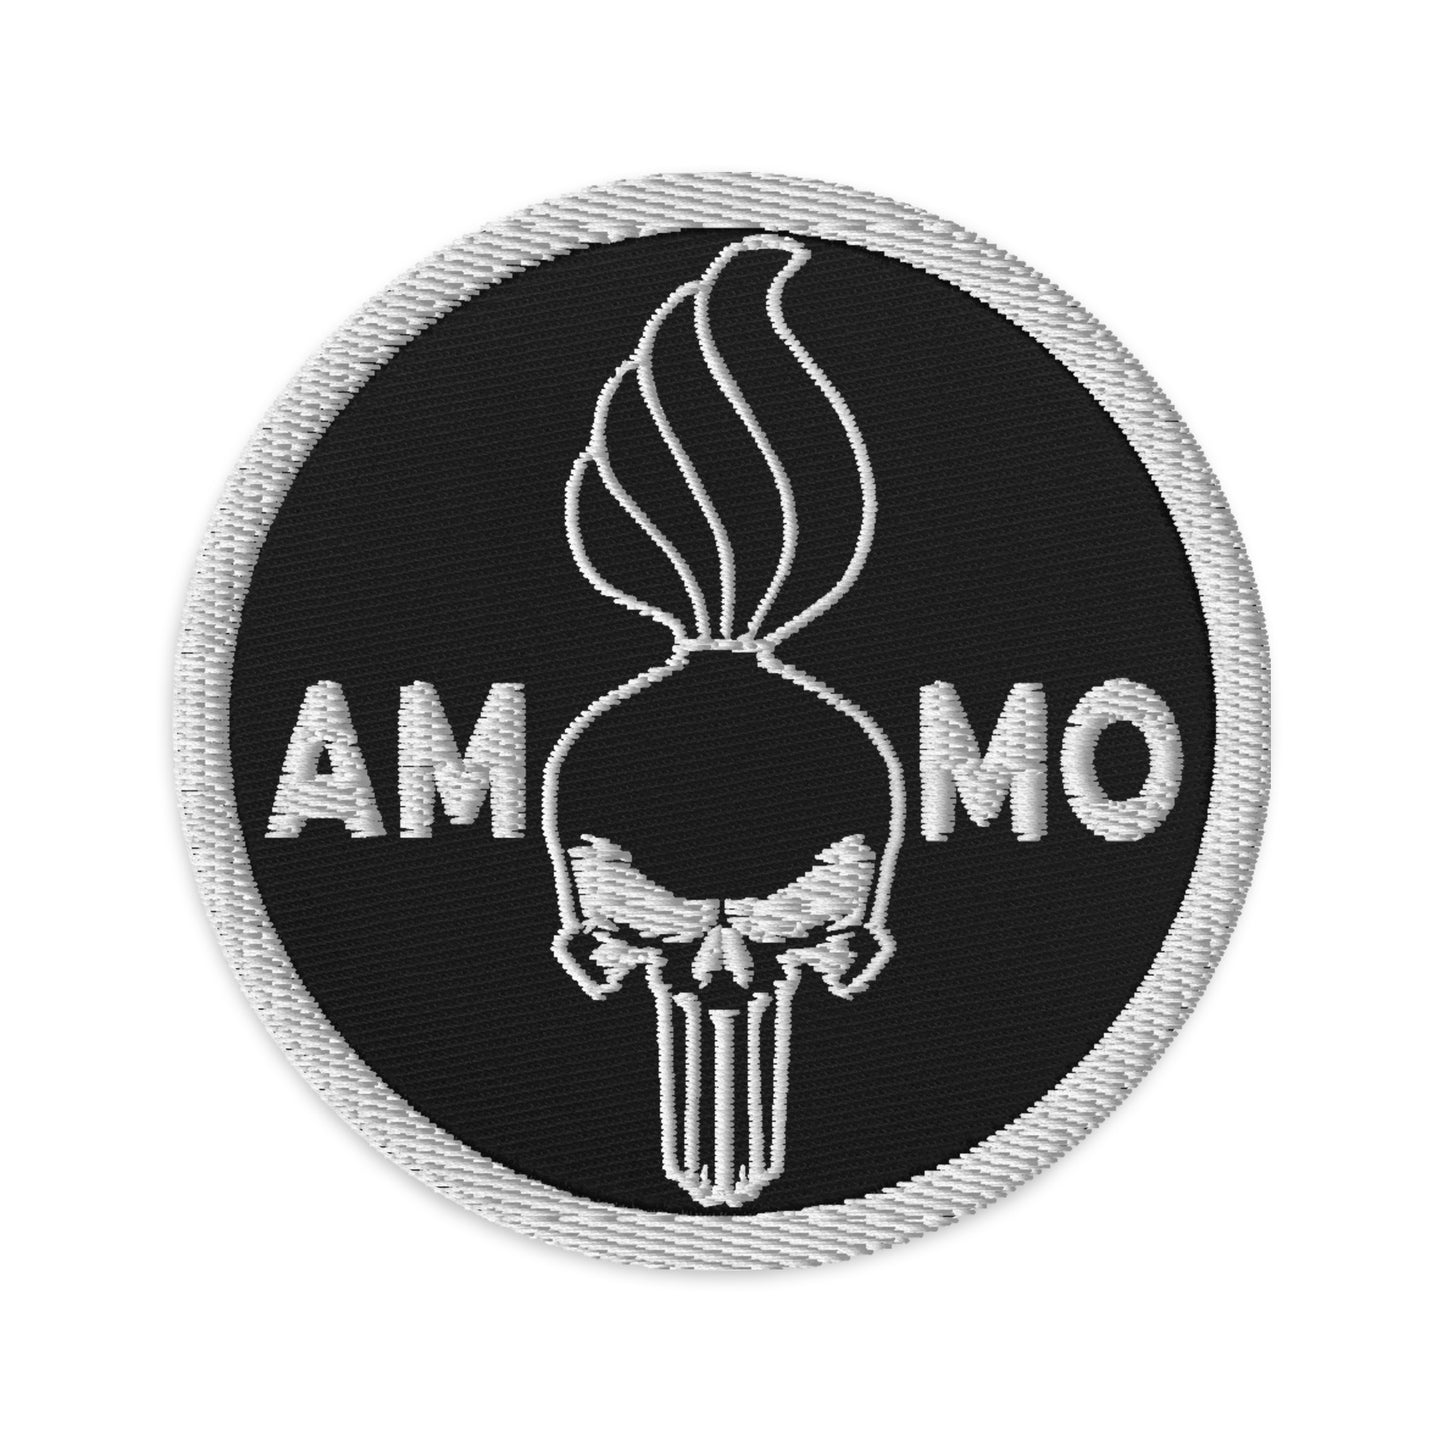 USAF AMMO Punisher Pisspot Circular Logo Embroidered Patches